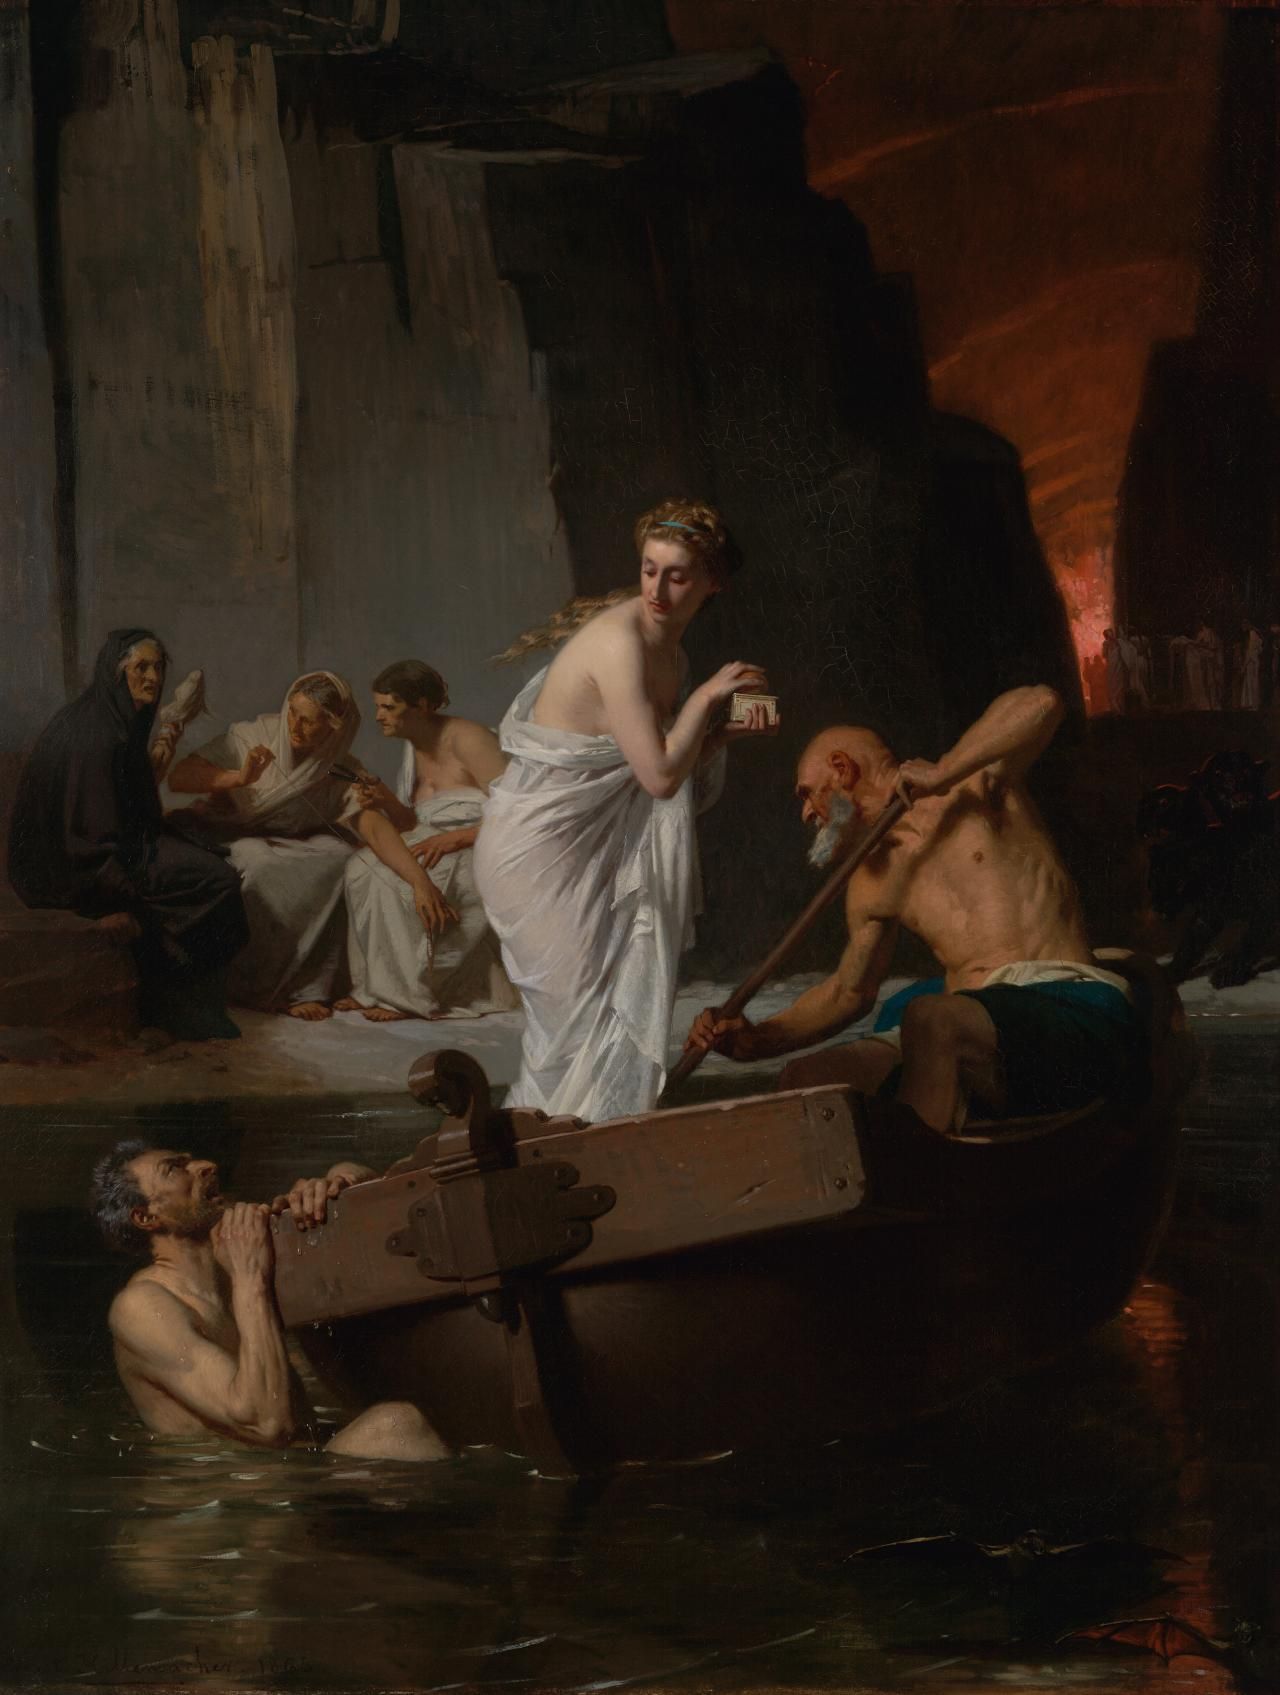 Psyche is on Charon the Ferryman's boat heading to the underworld.